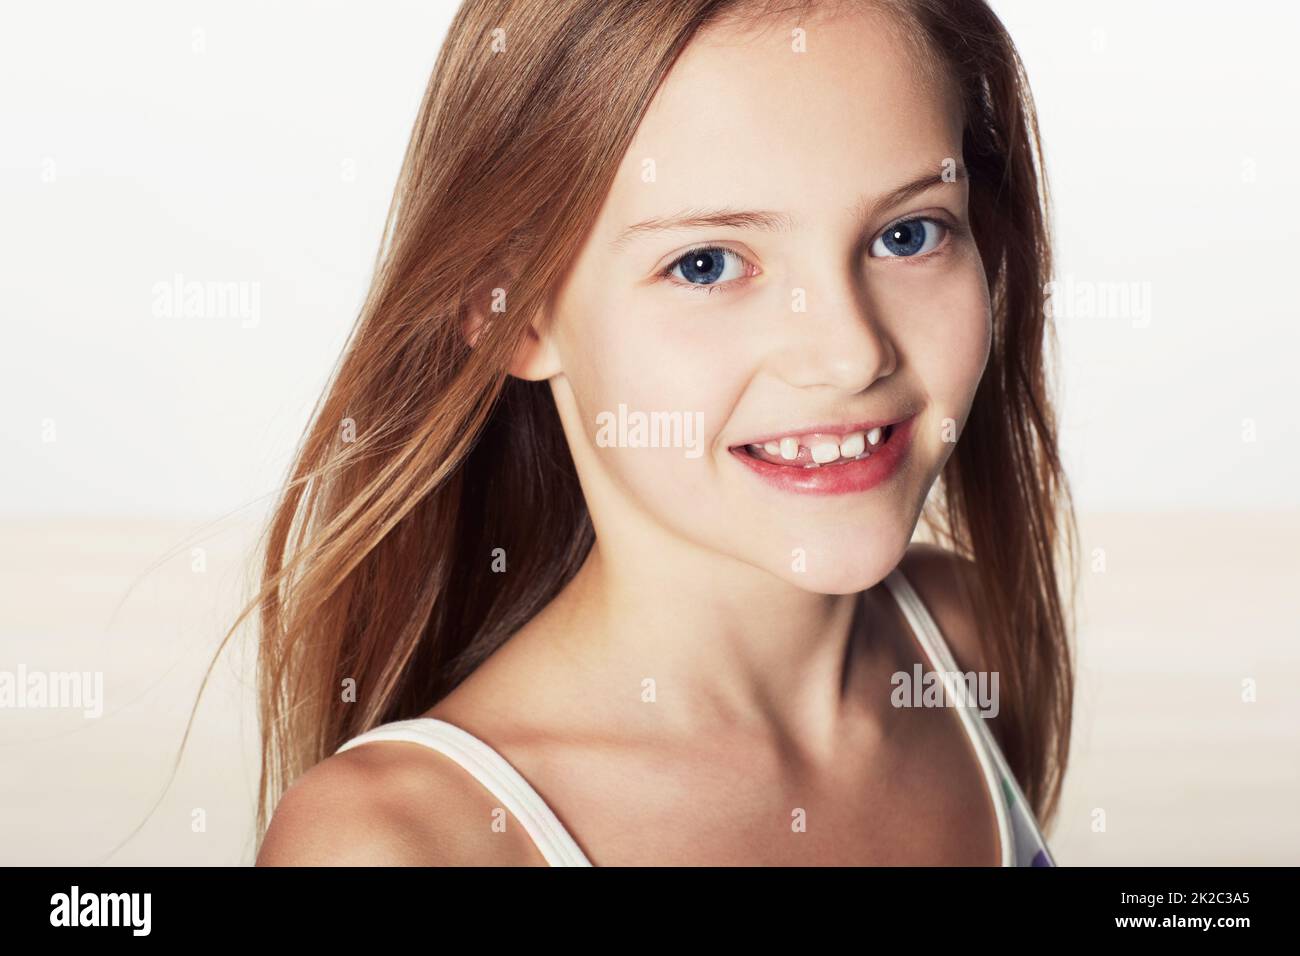 Sweet and innocent. Cropped portrait of a cute little girl smiling. Stock Photo